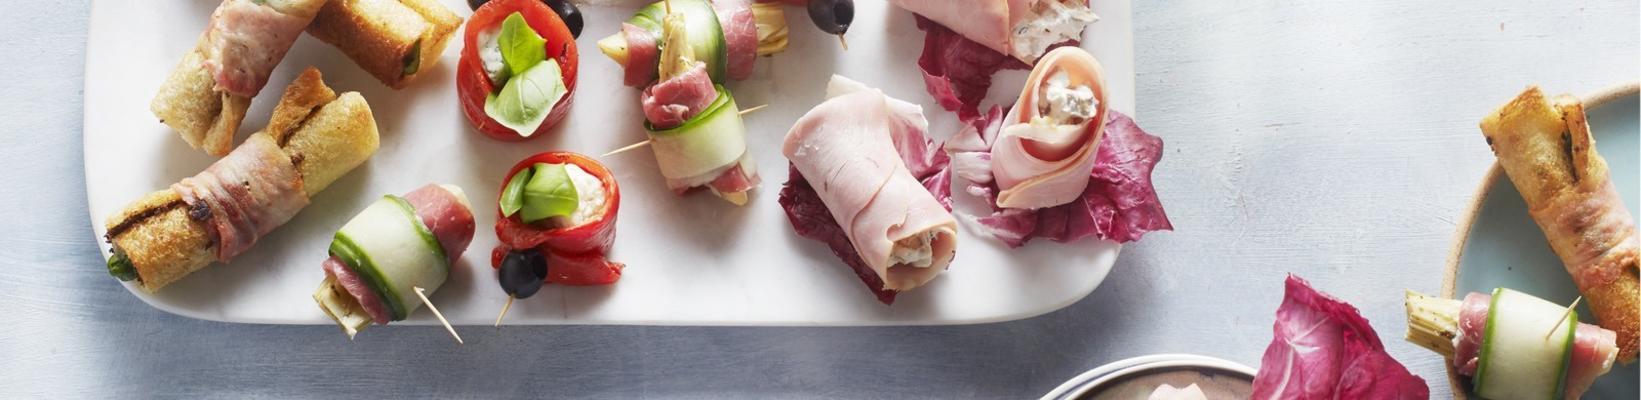 cucumber rolls with smoked meat and artichoke